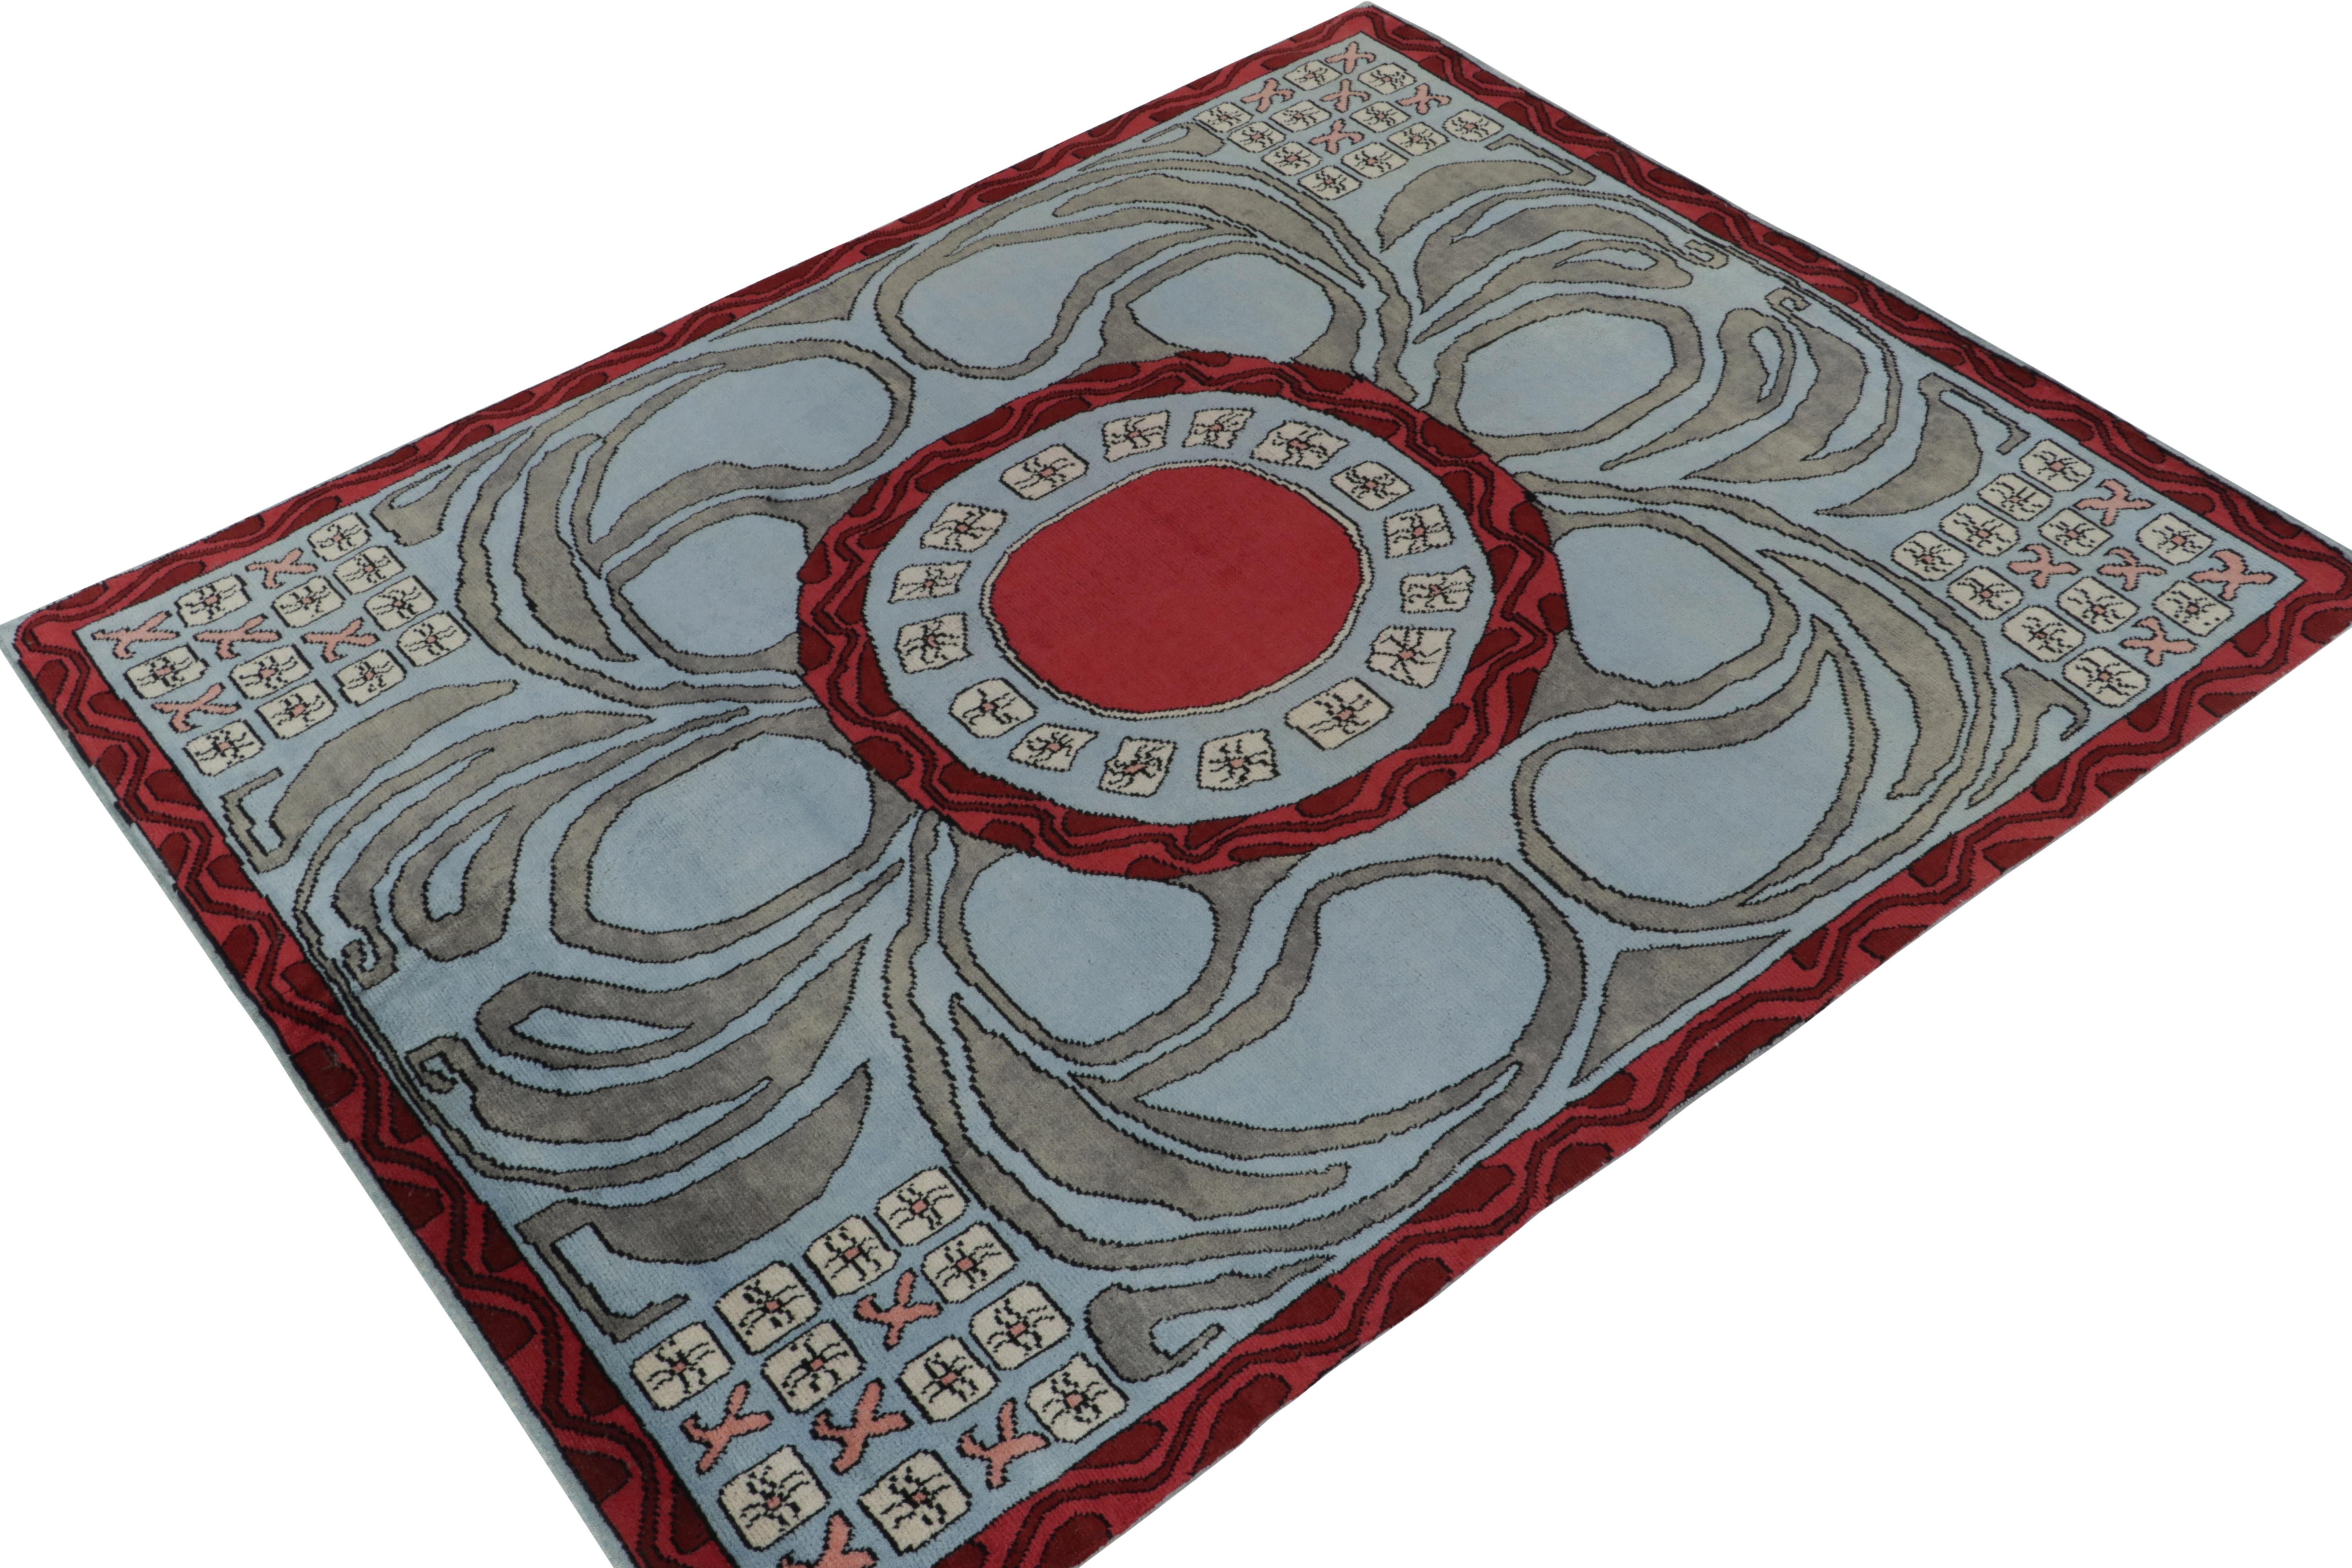 Relishing fine hand-knotted wool, an 8x10 from the inspired new Deco Collection by Rug & Kilim. 

On the Design: Drawing on French art deco rug styles of the 1920s, the piece enjoys a medallion pattern in red and silver-gray atop a charming